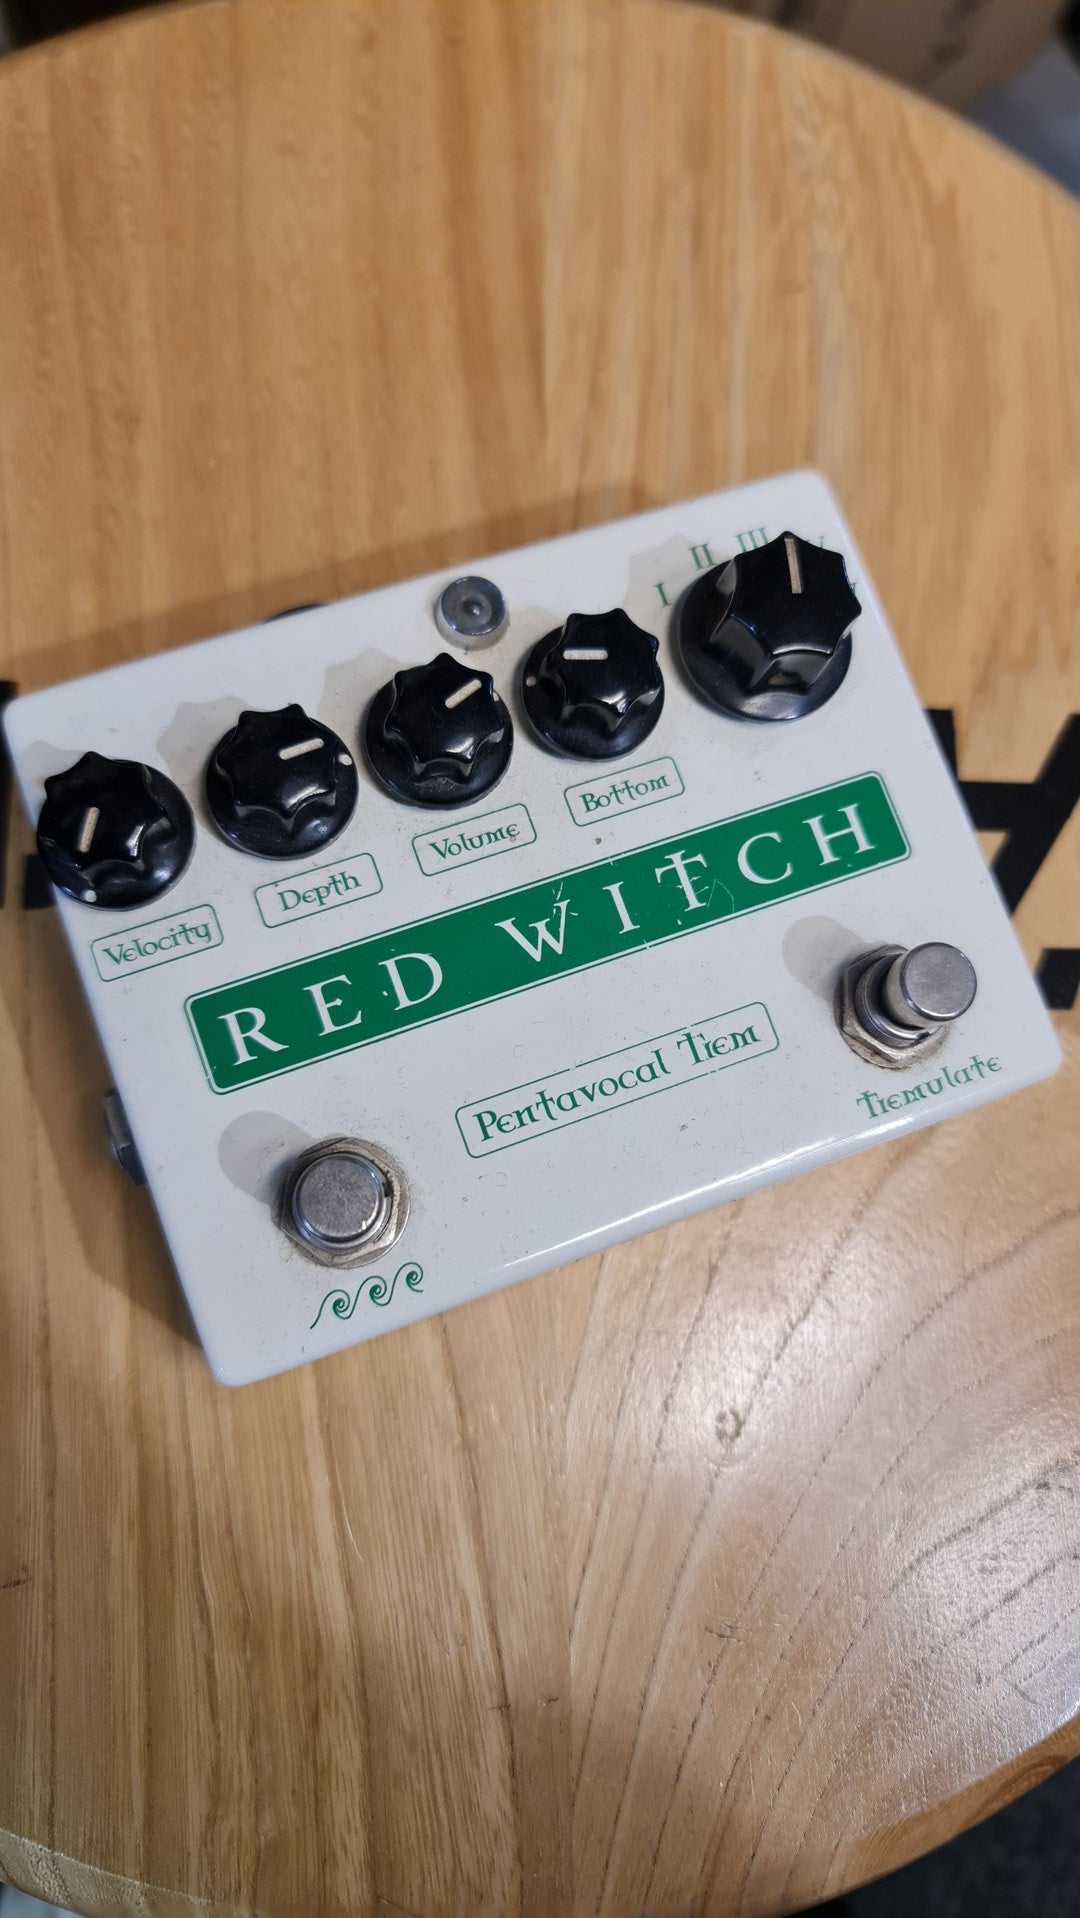 RED WITCH Pentavocal Tremoro